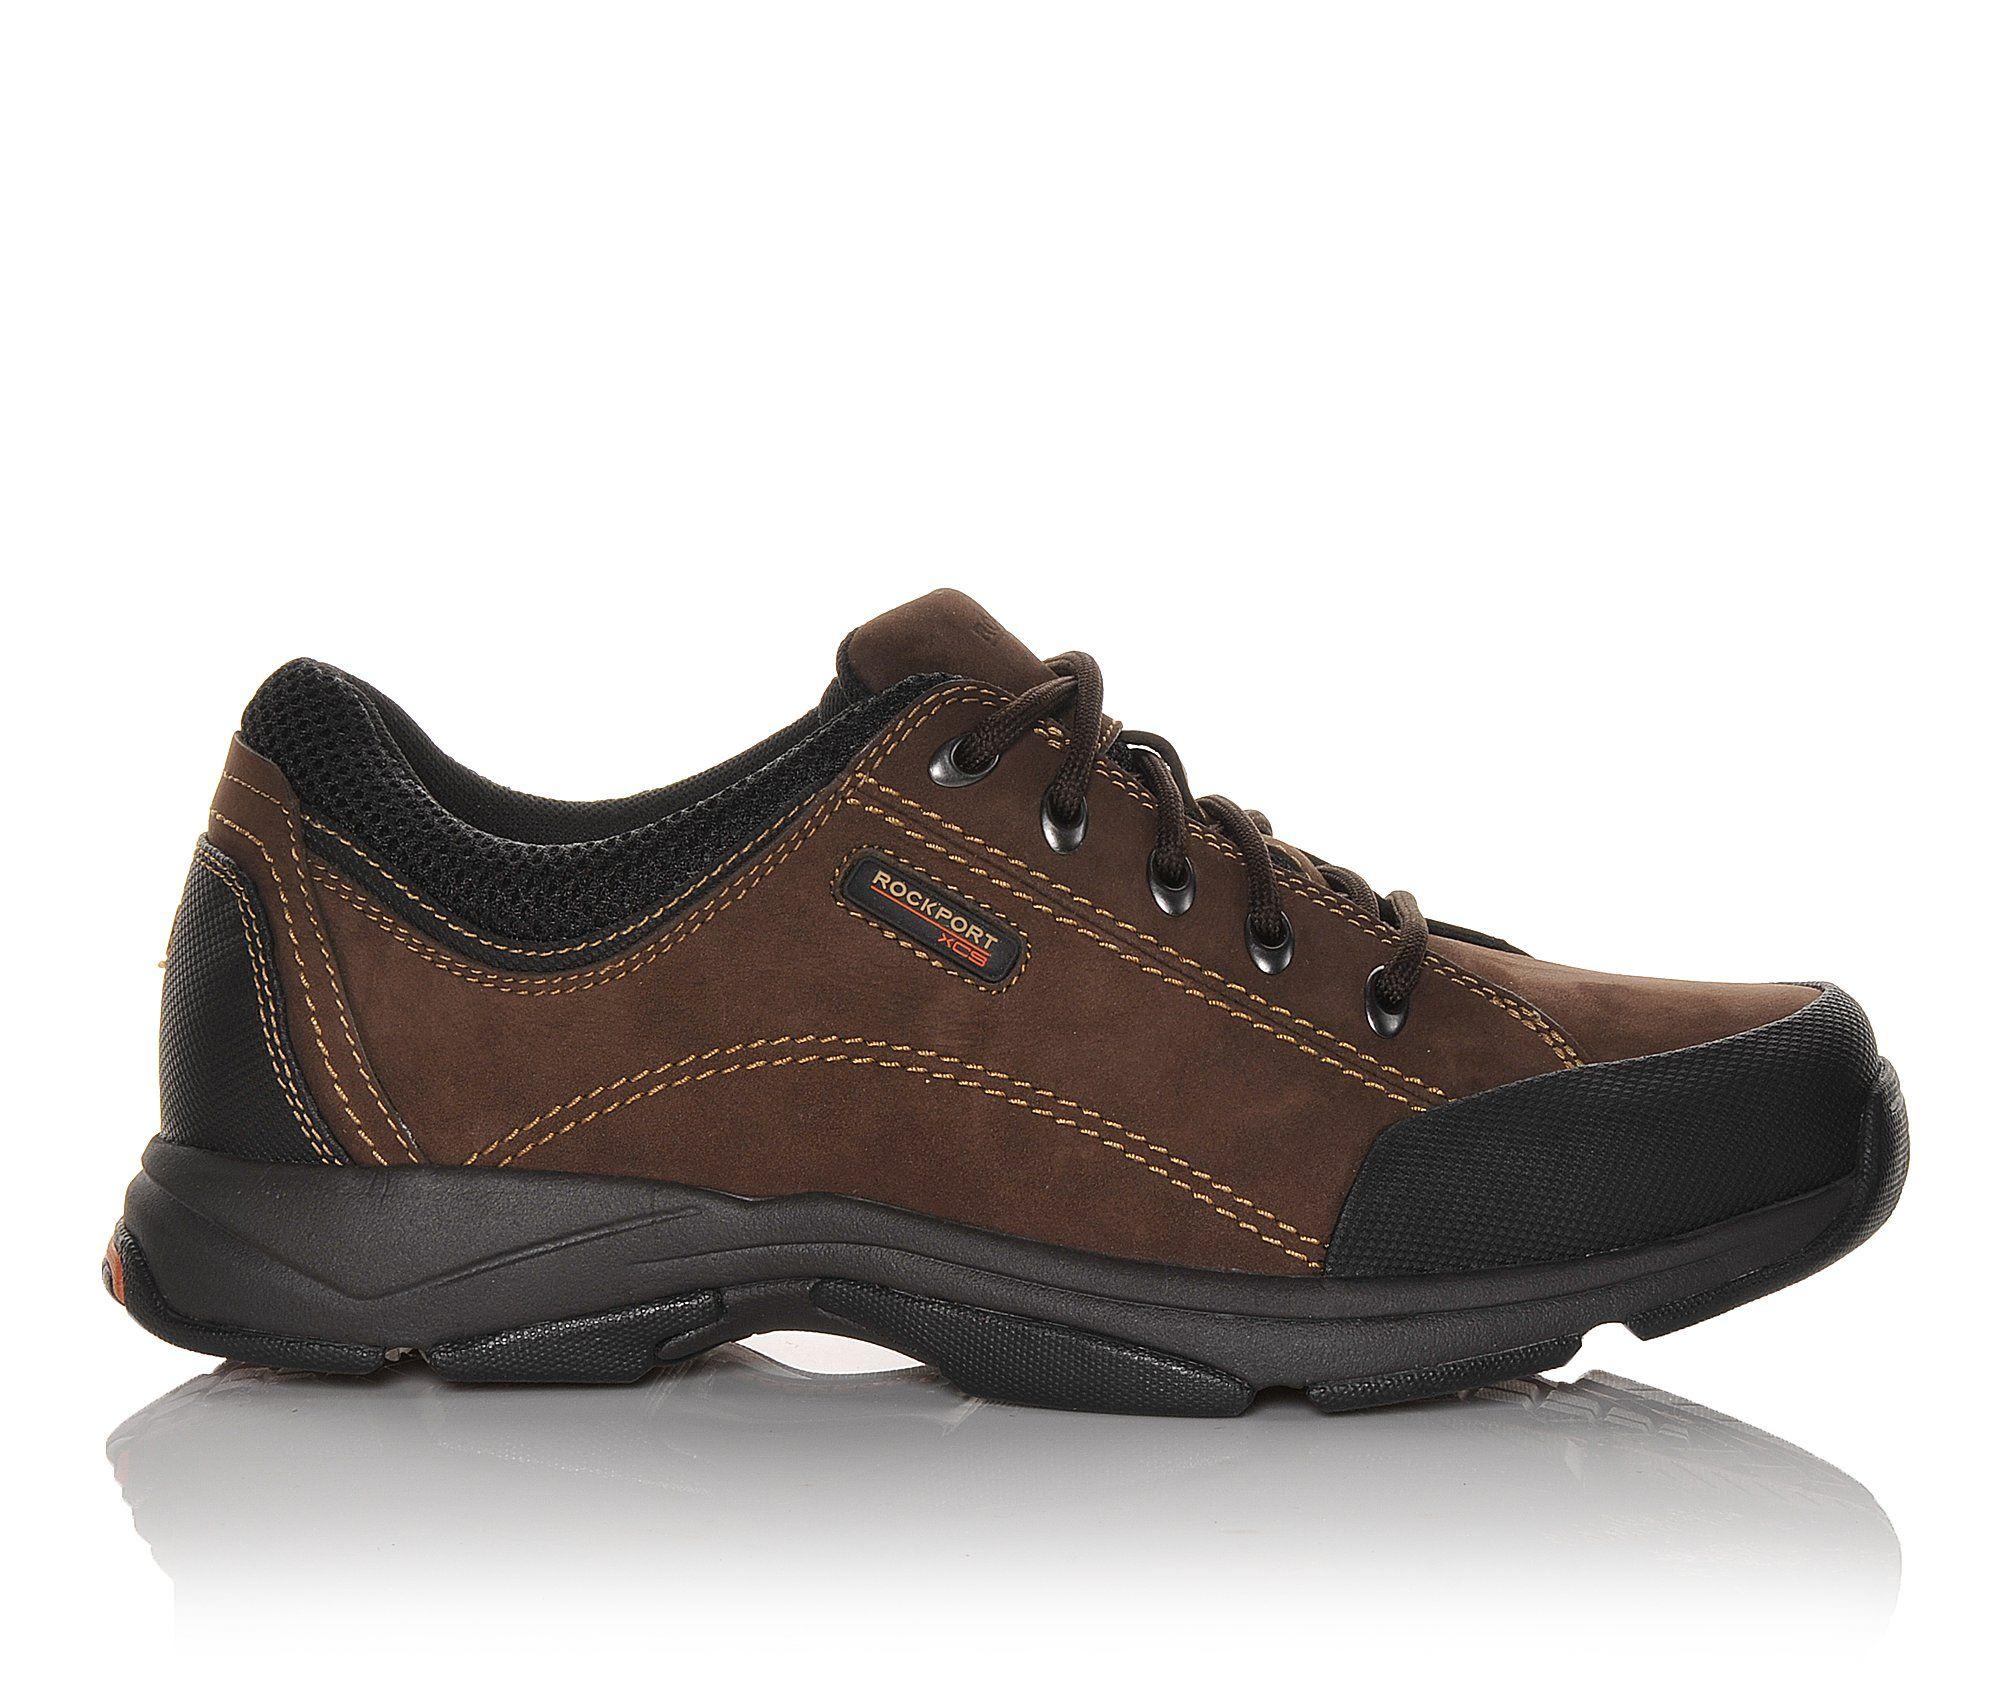 Rockport Leather Chranson Shoe in Brown for Men - Lyst